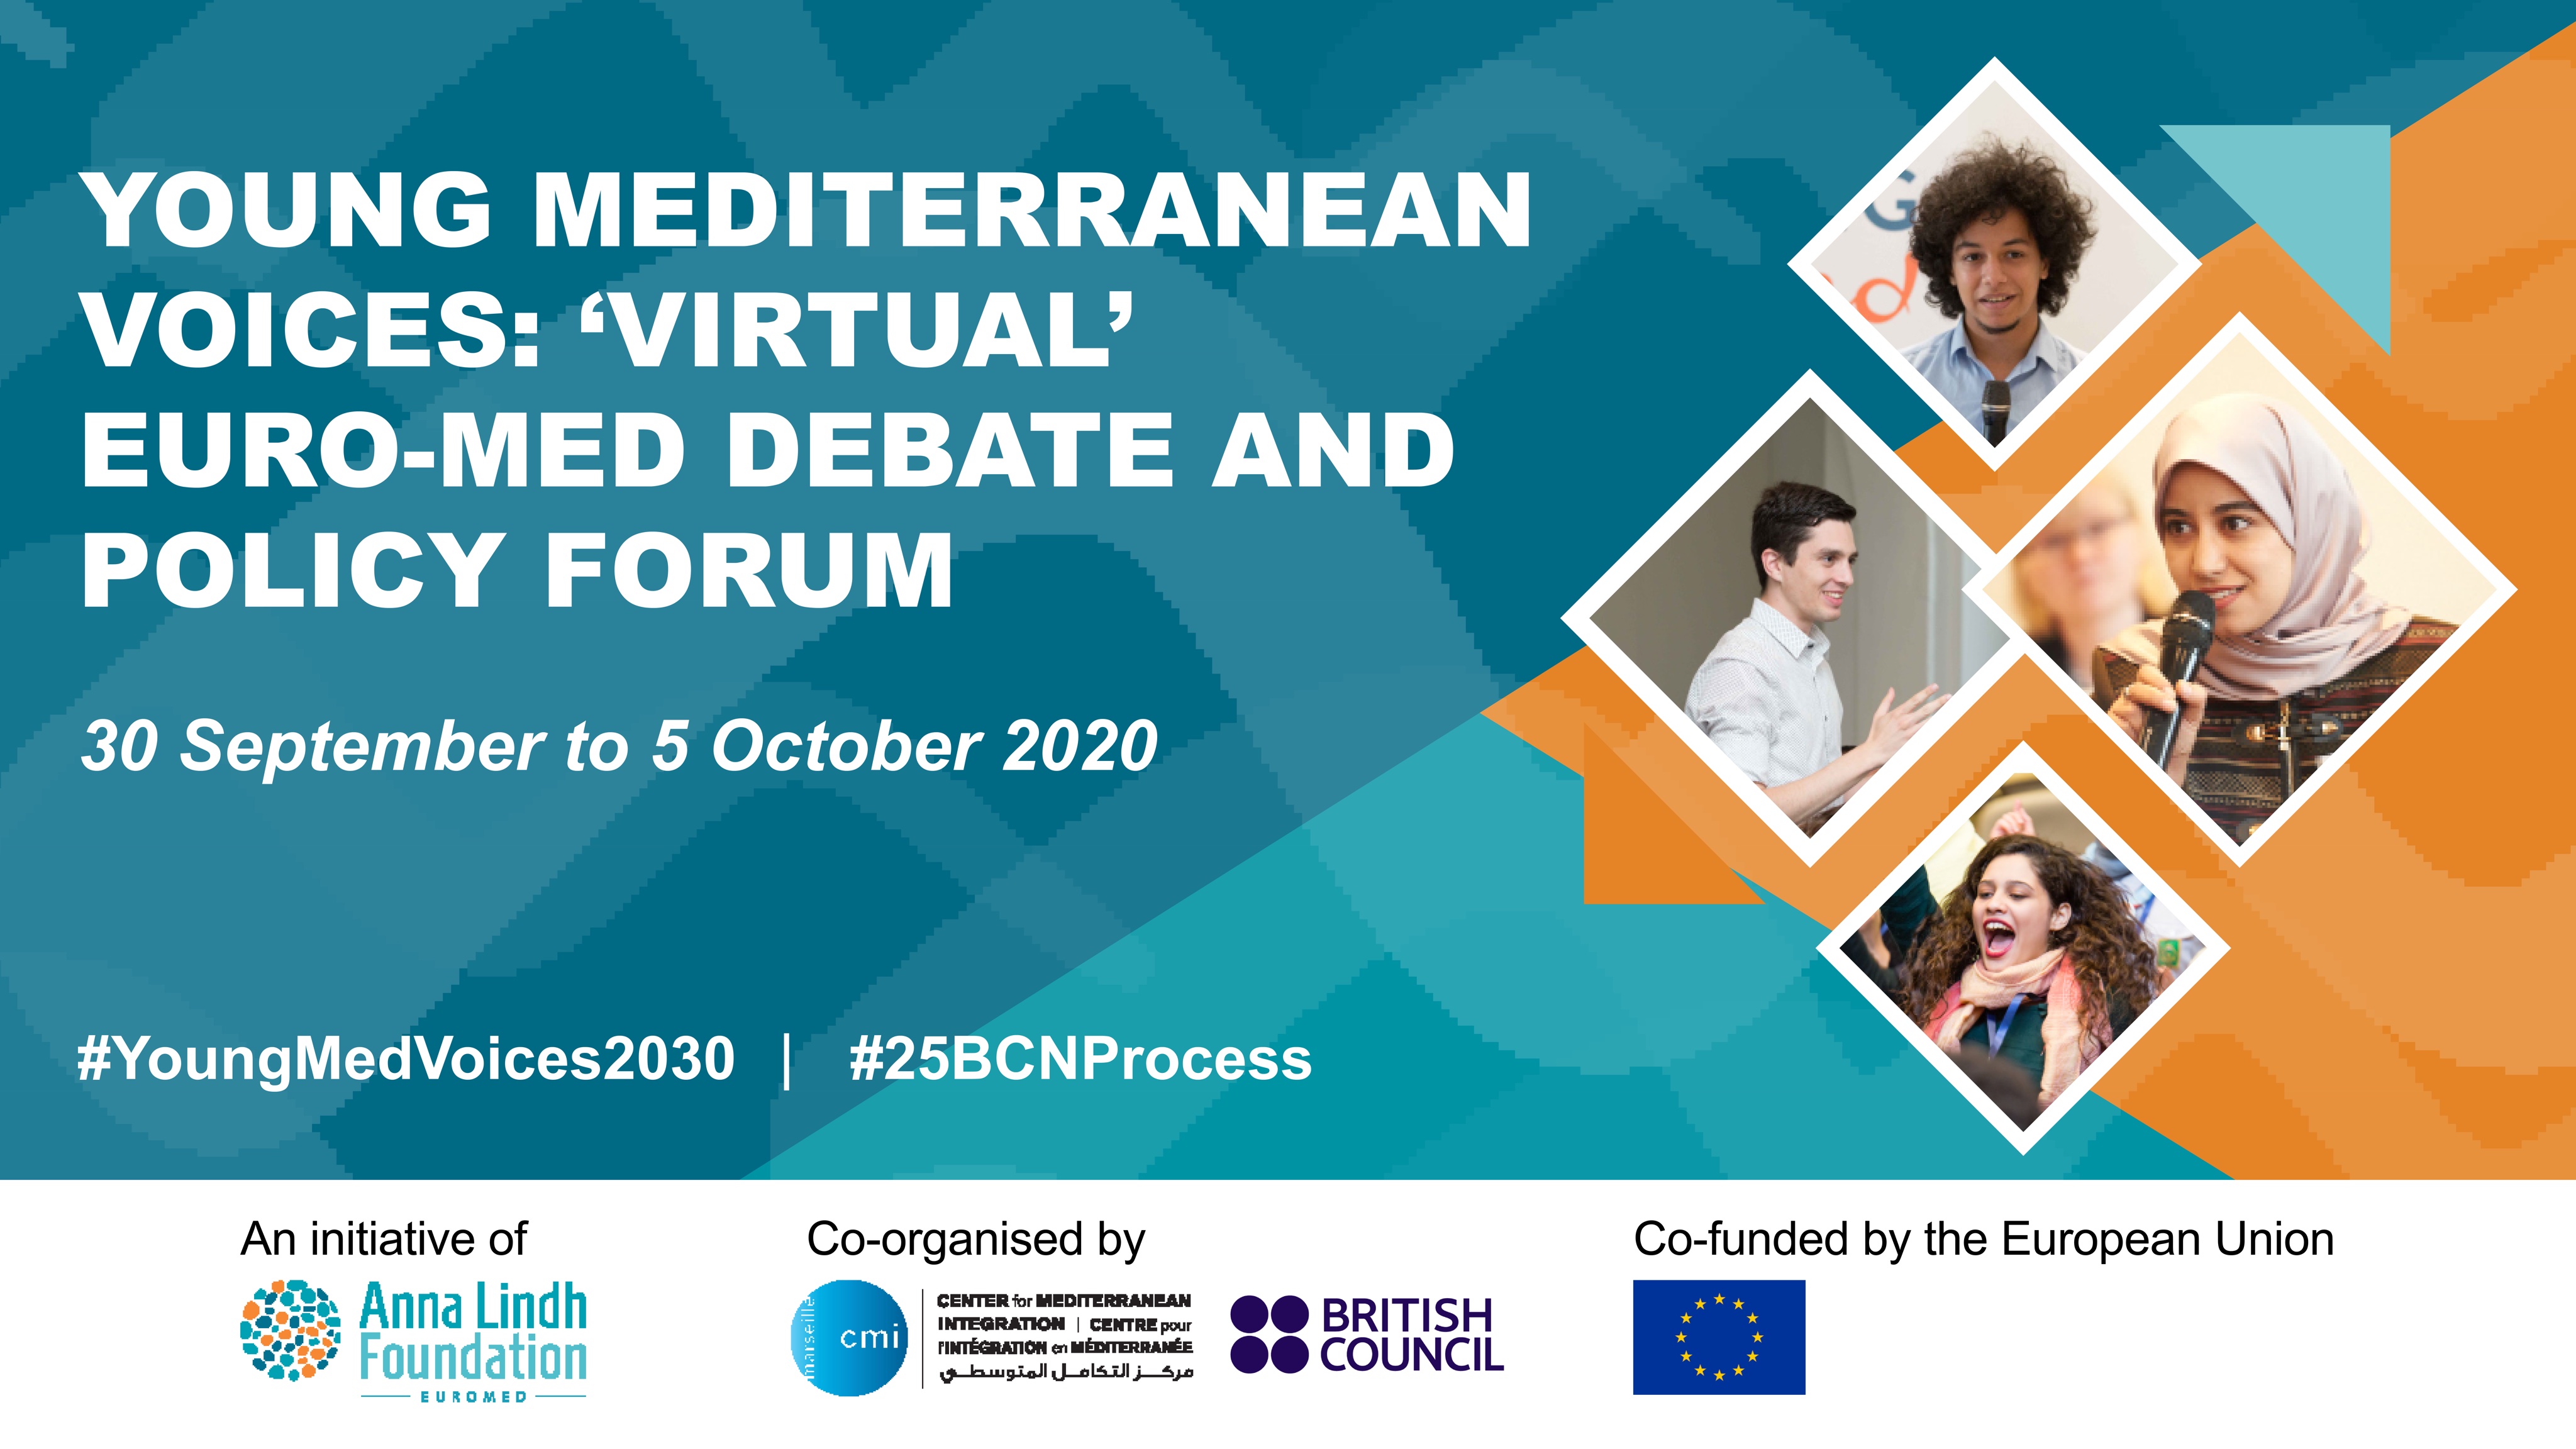 Young Mediterranean Voices Virtual Euro-Med Debate and Policy Forum